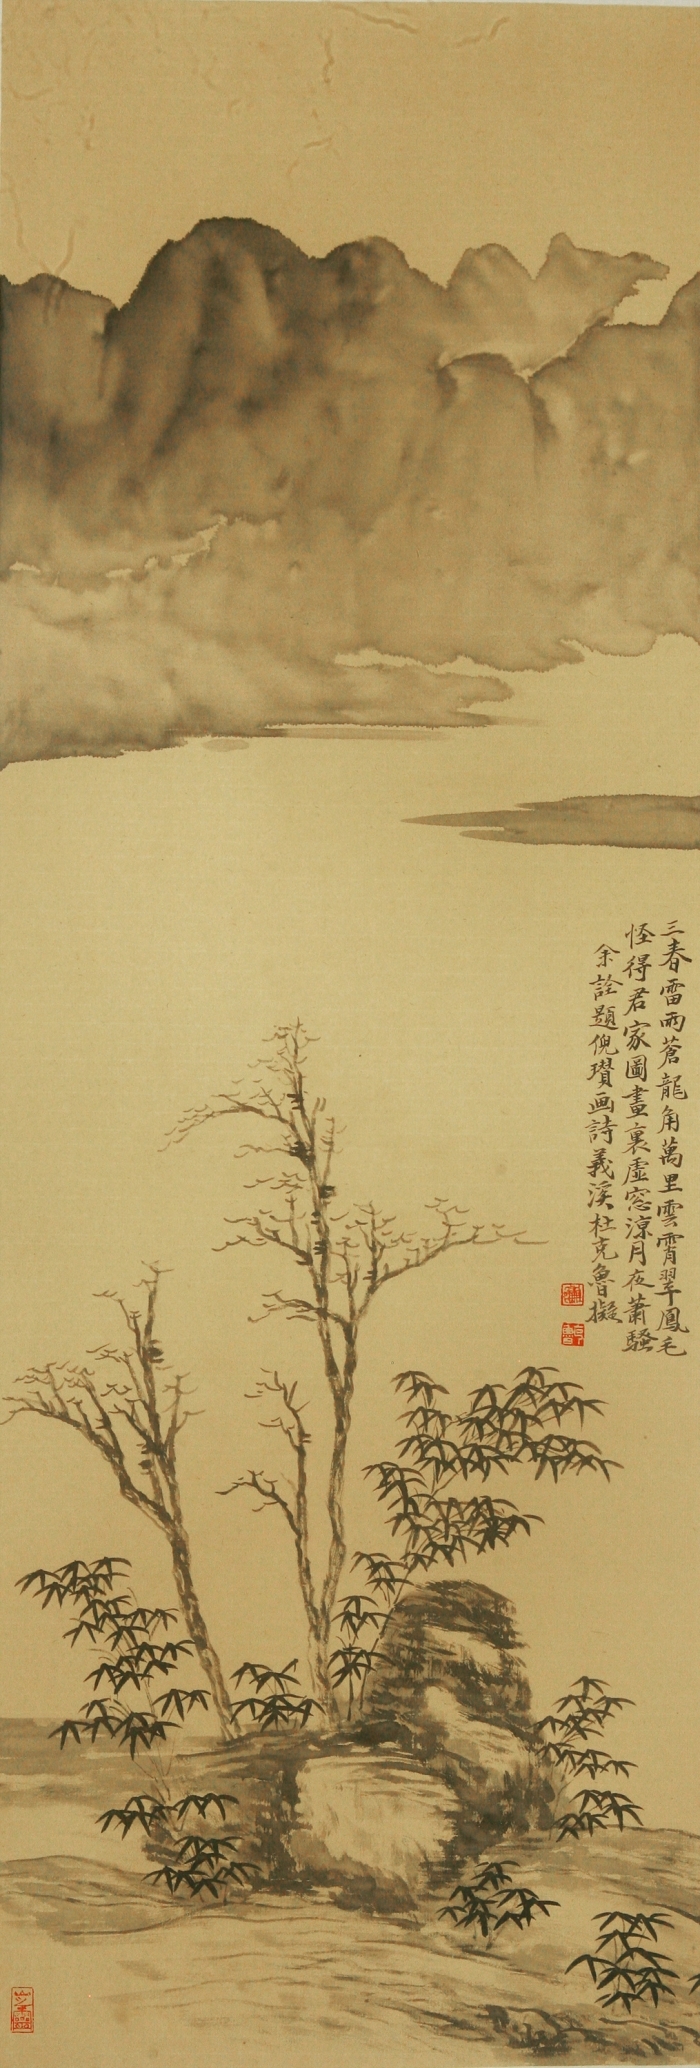 Hefeng Hall Gallery's Contemporary Chinese Painting - Learning form the Past 3